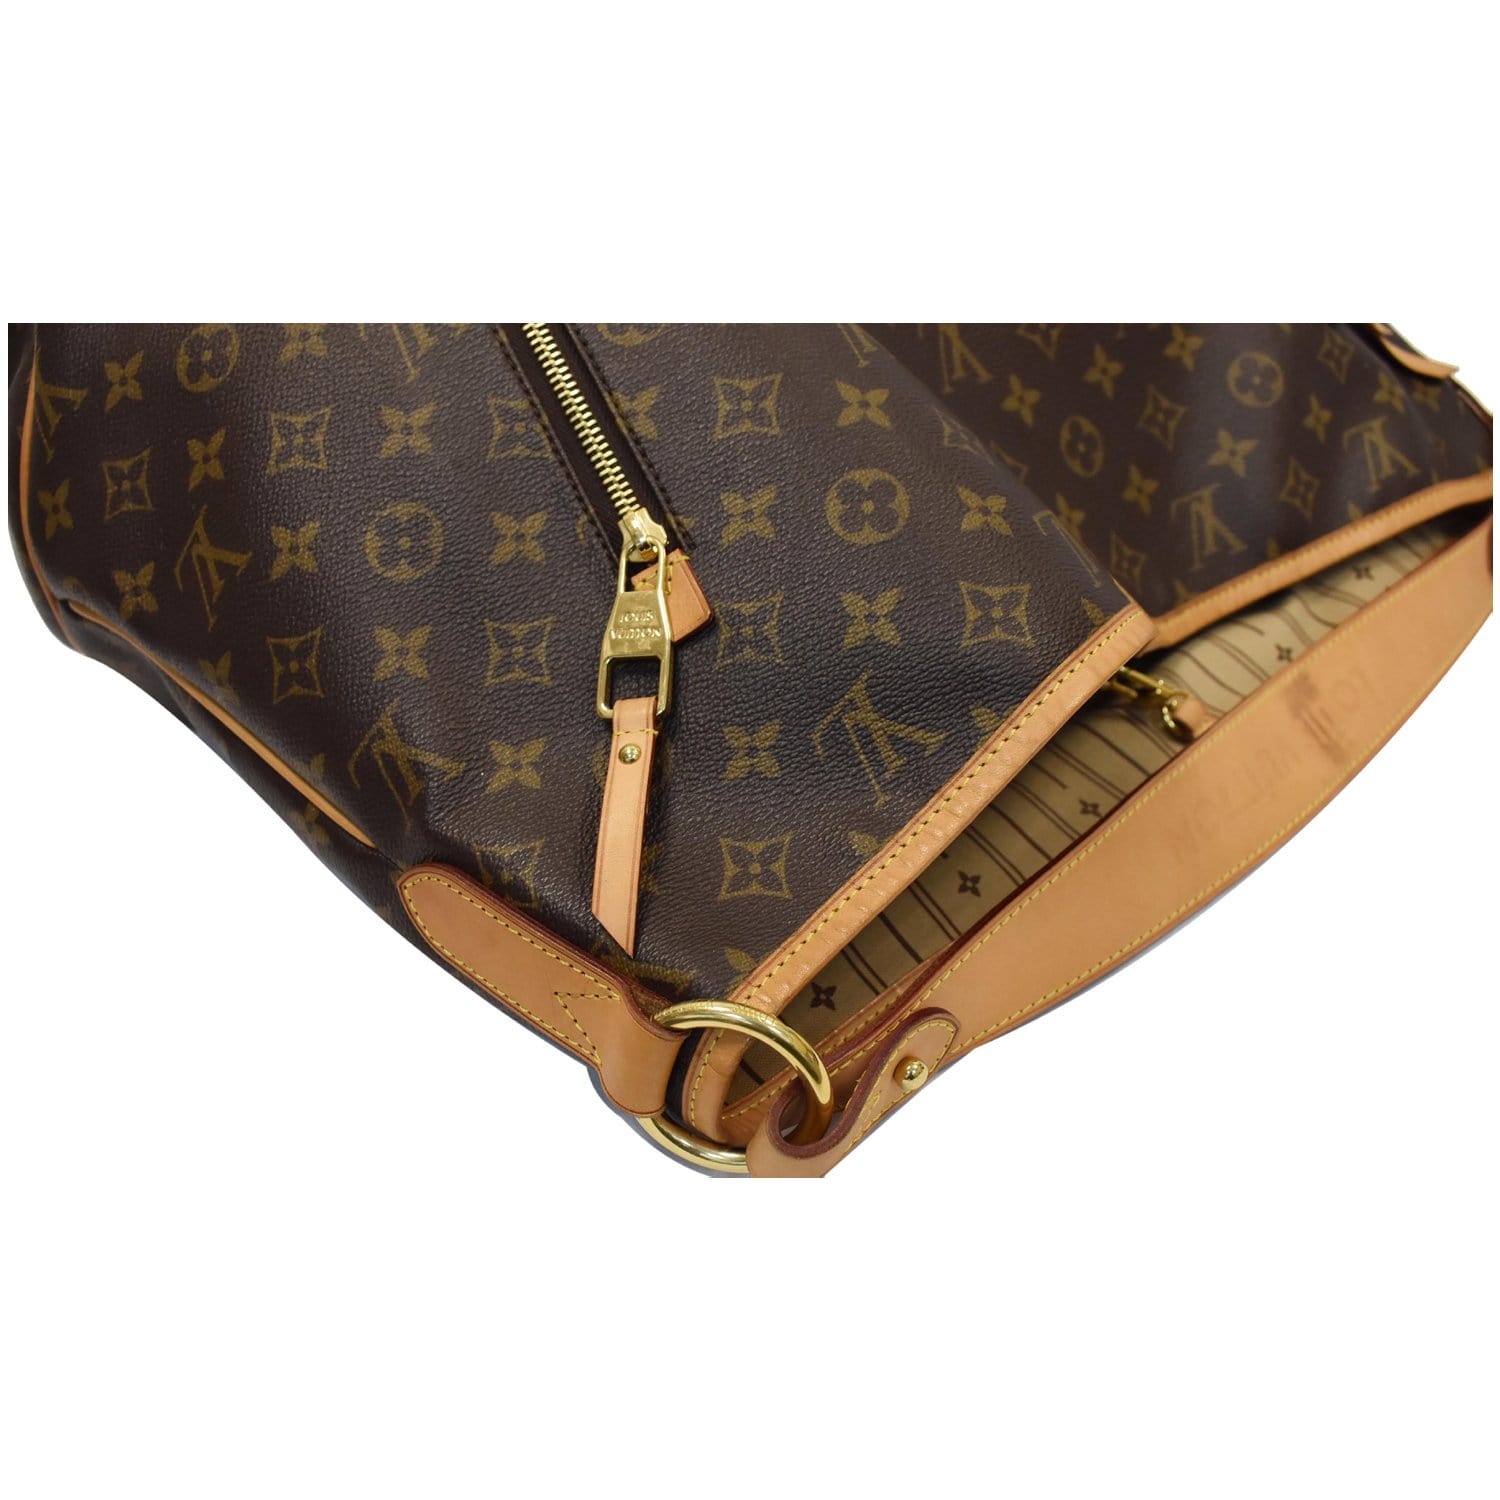 myluxurydesignerbranded - Excellent Like New Authentic Louis